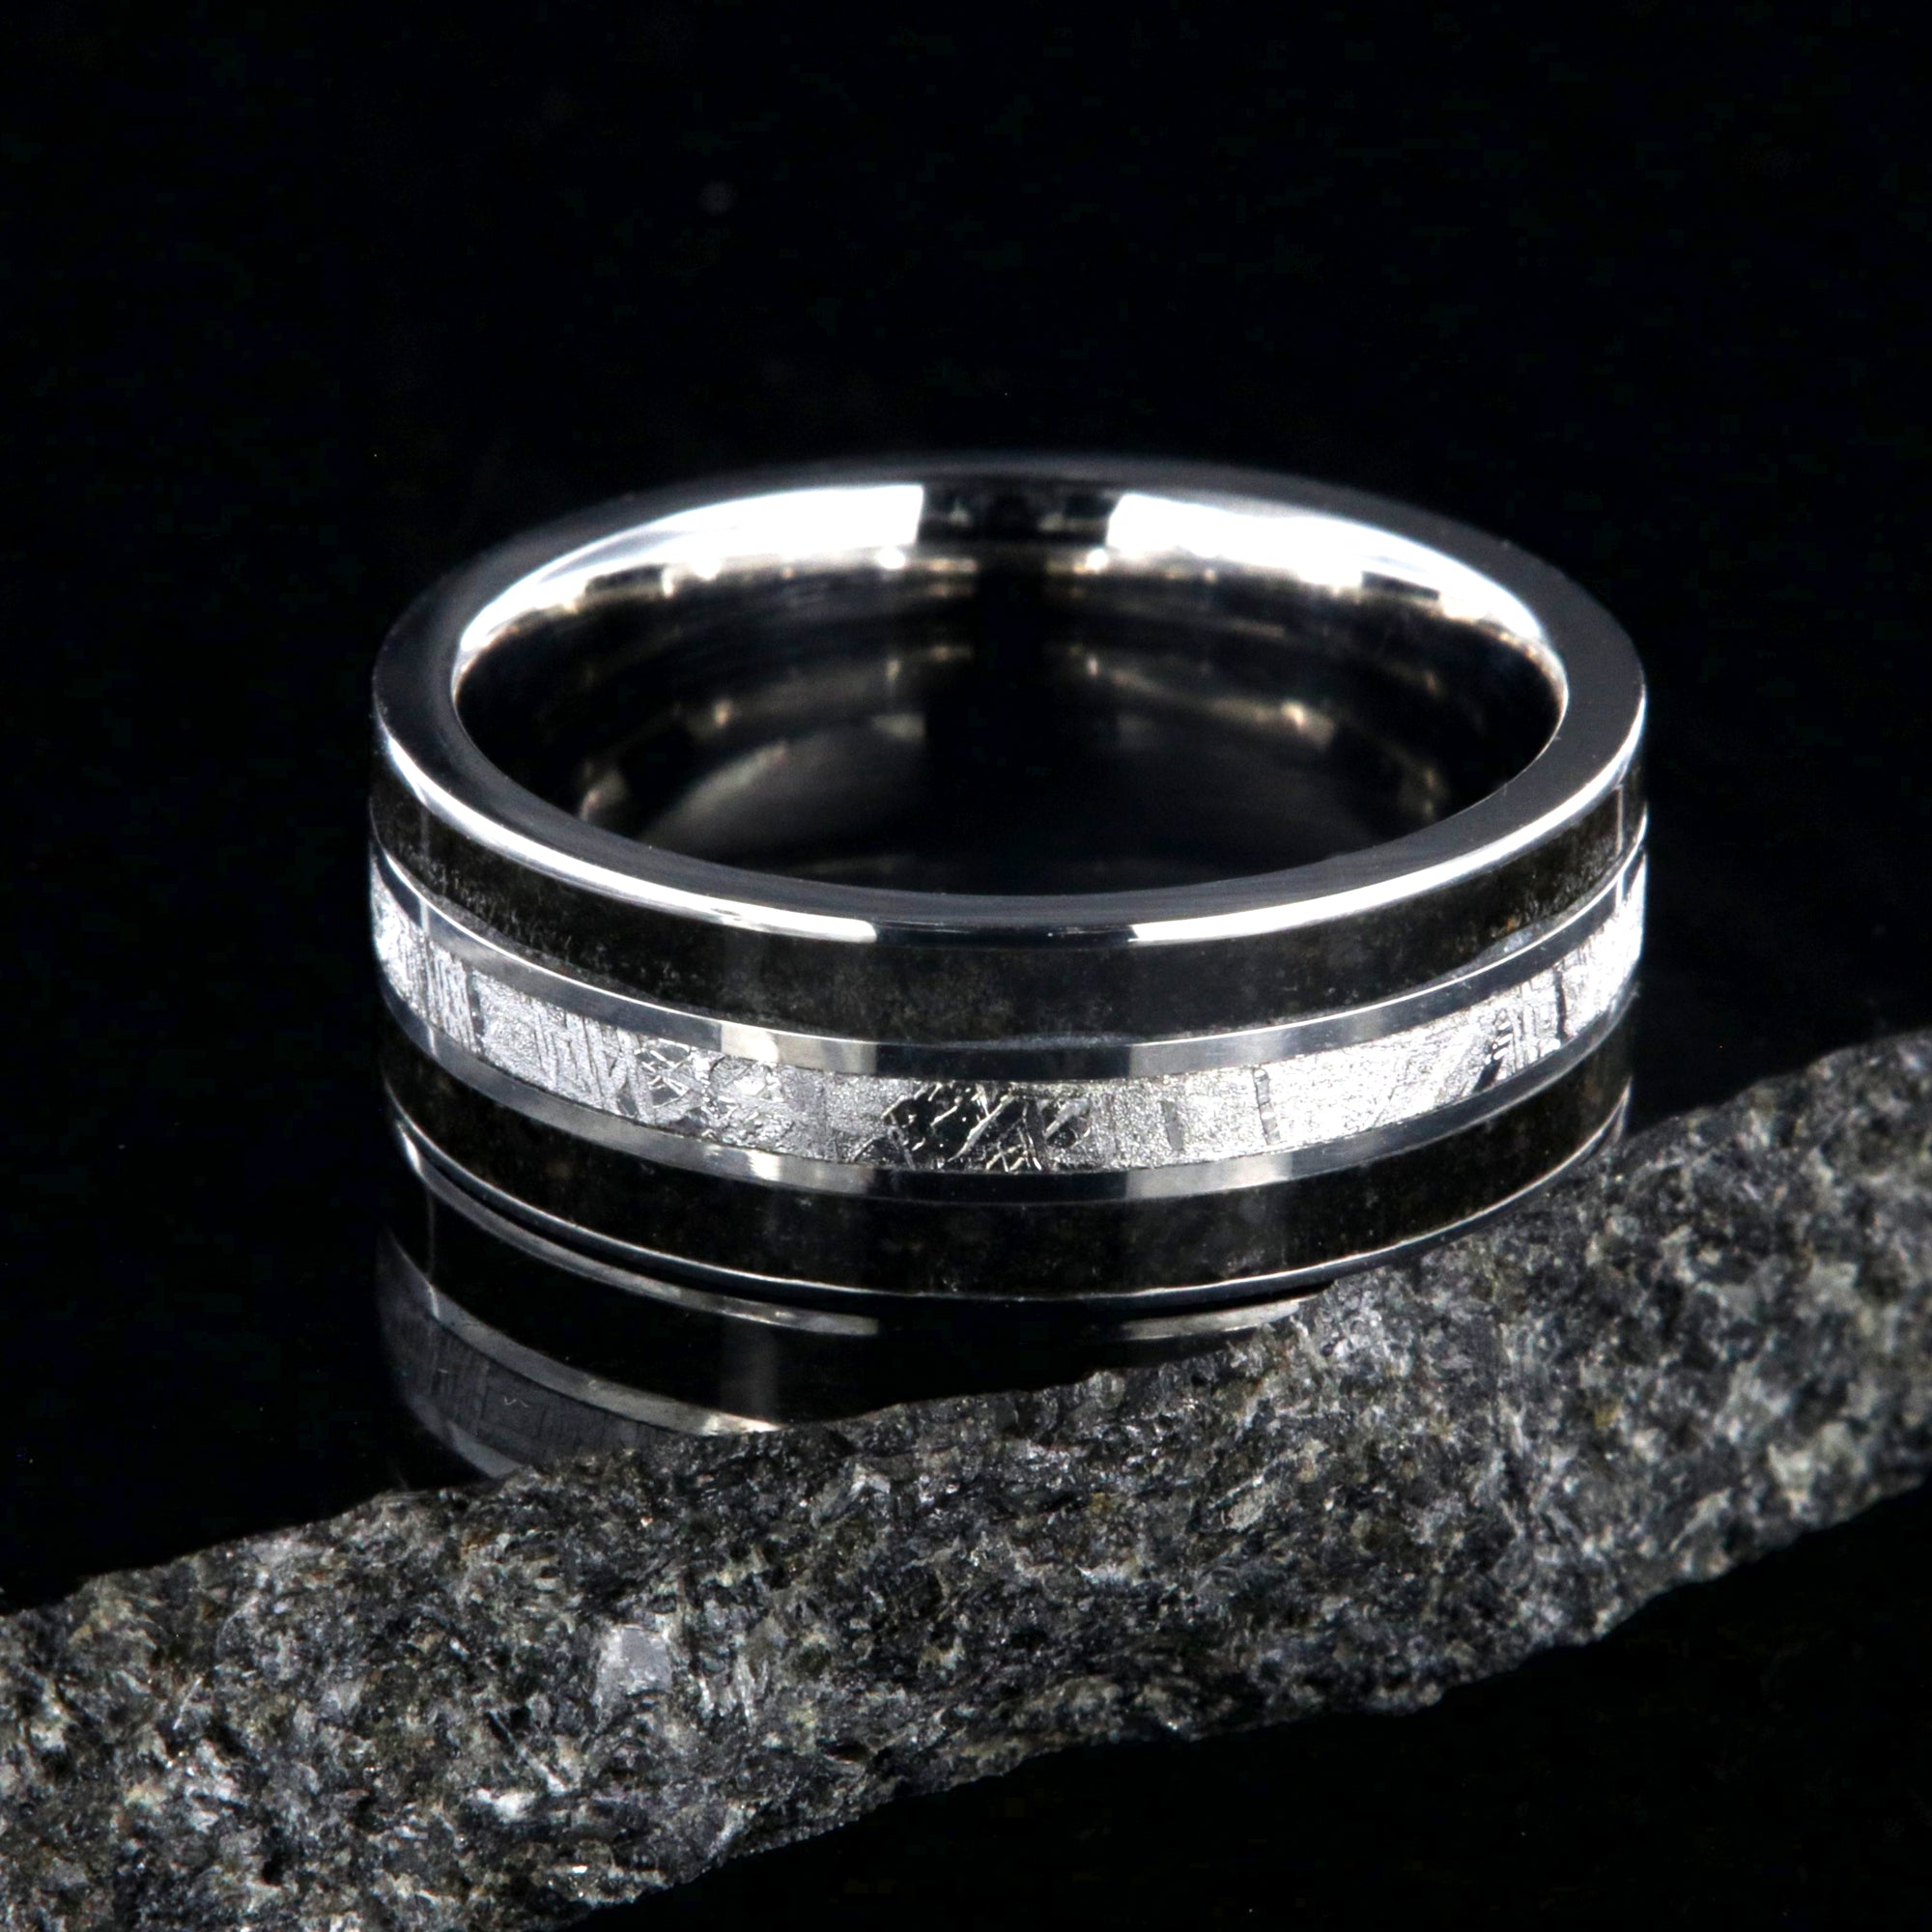 9mm wide men's wedding band with t-rex edges and meteorite center